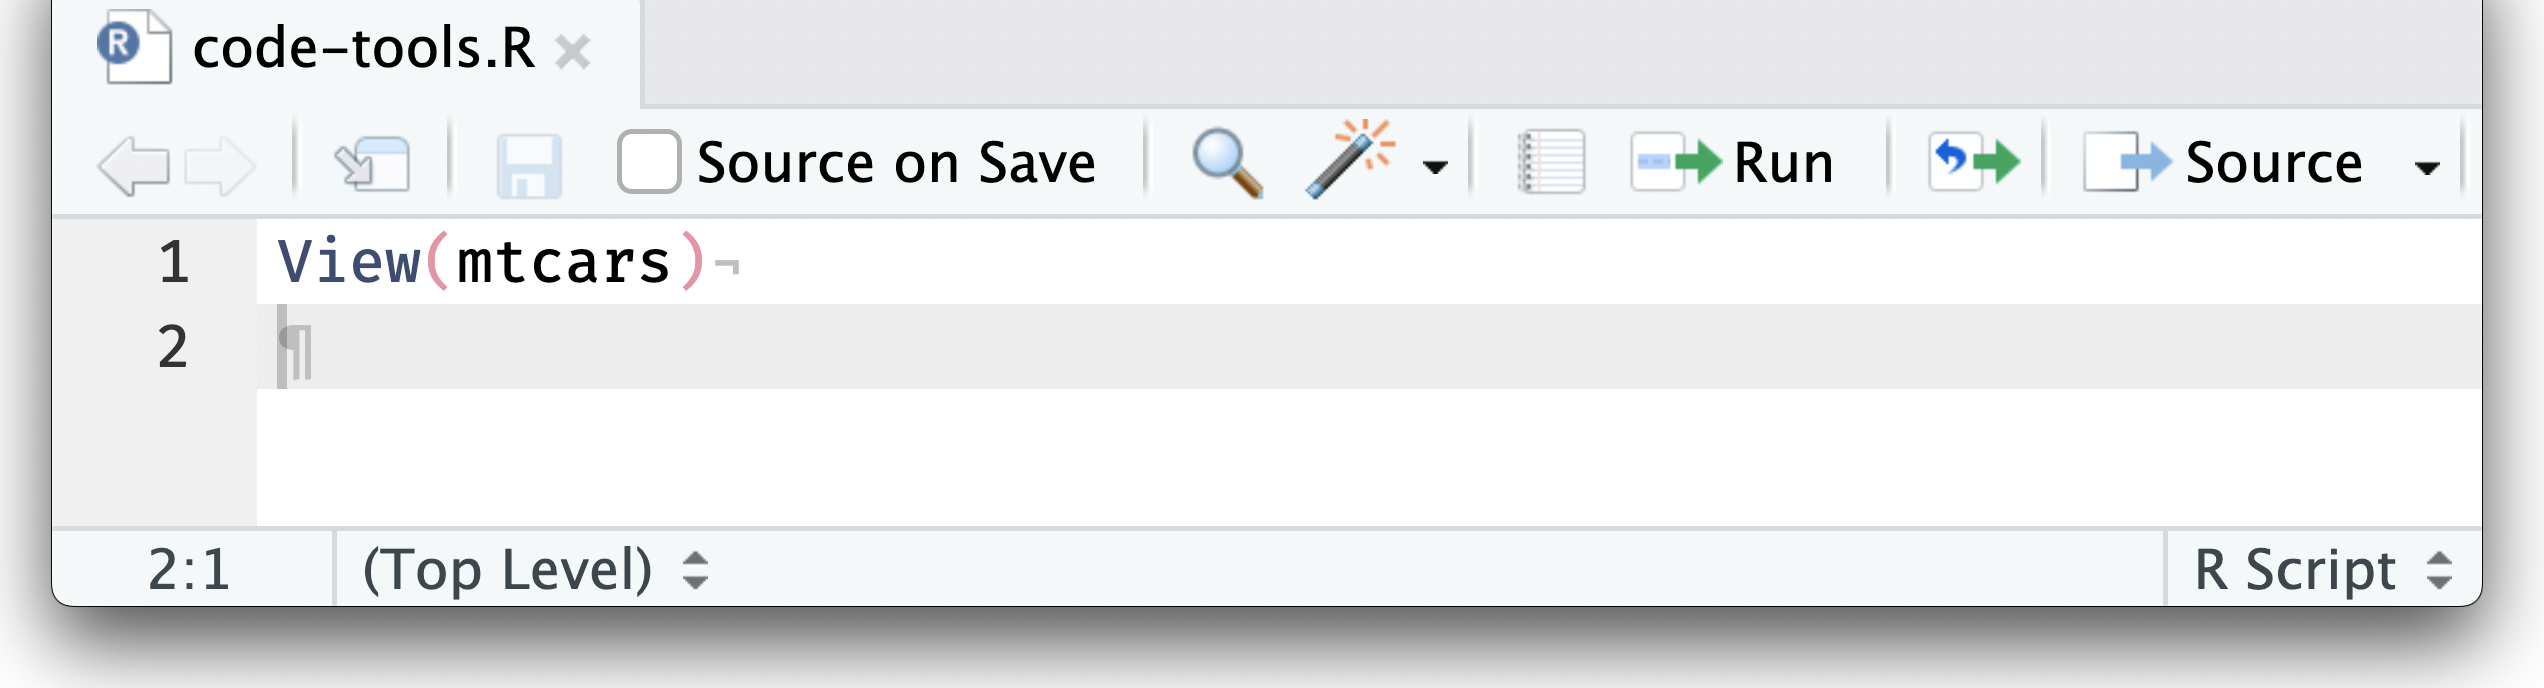 A screenshot of the RStudio source pane and the 'Run' button.